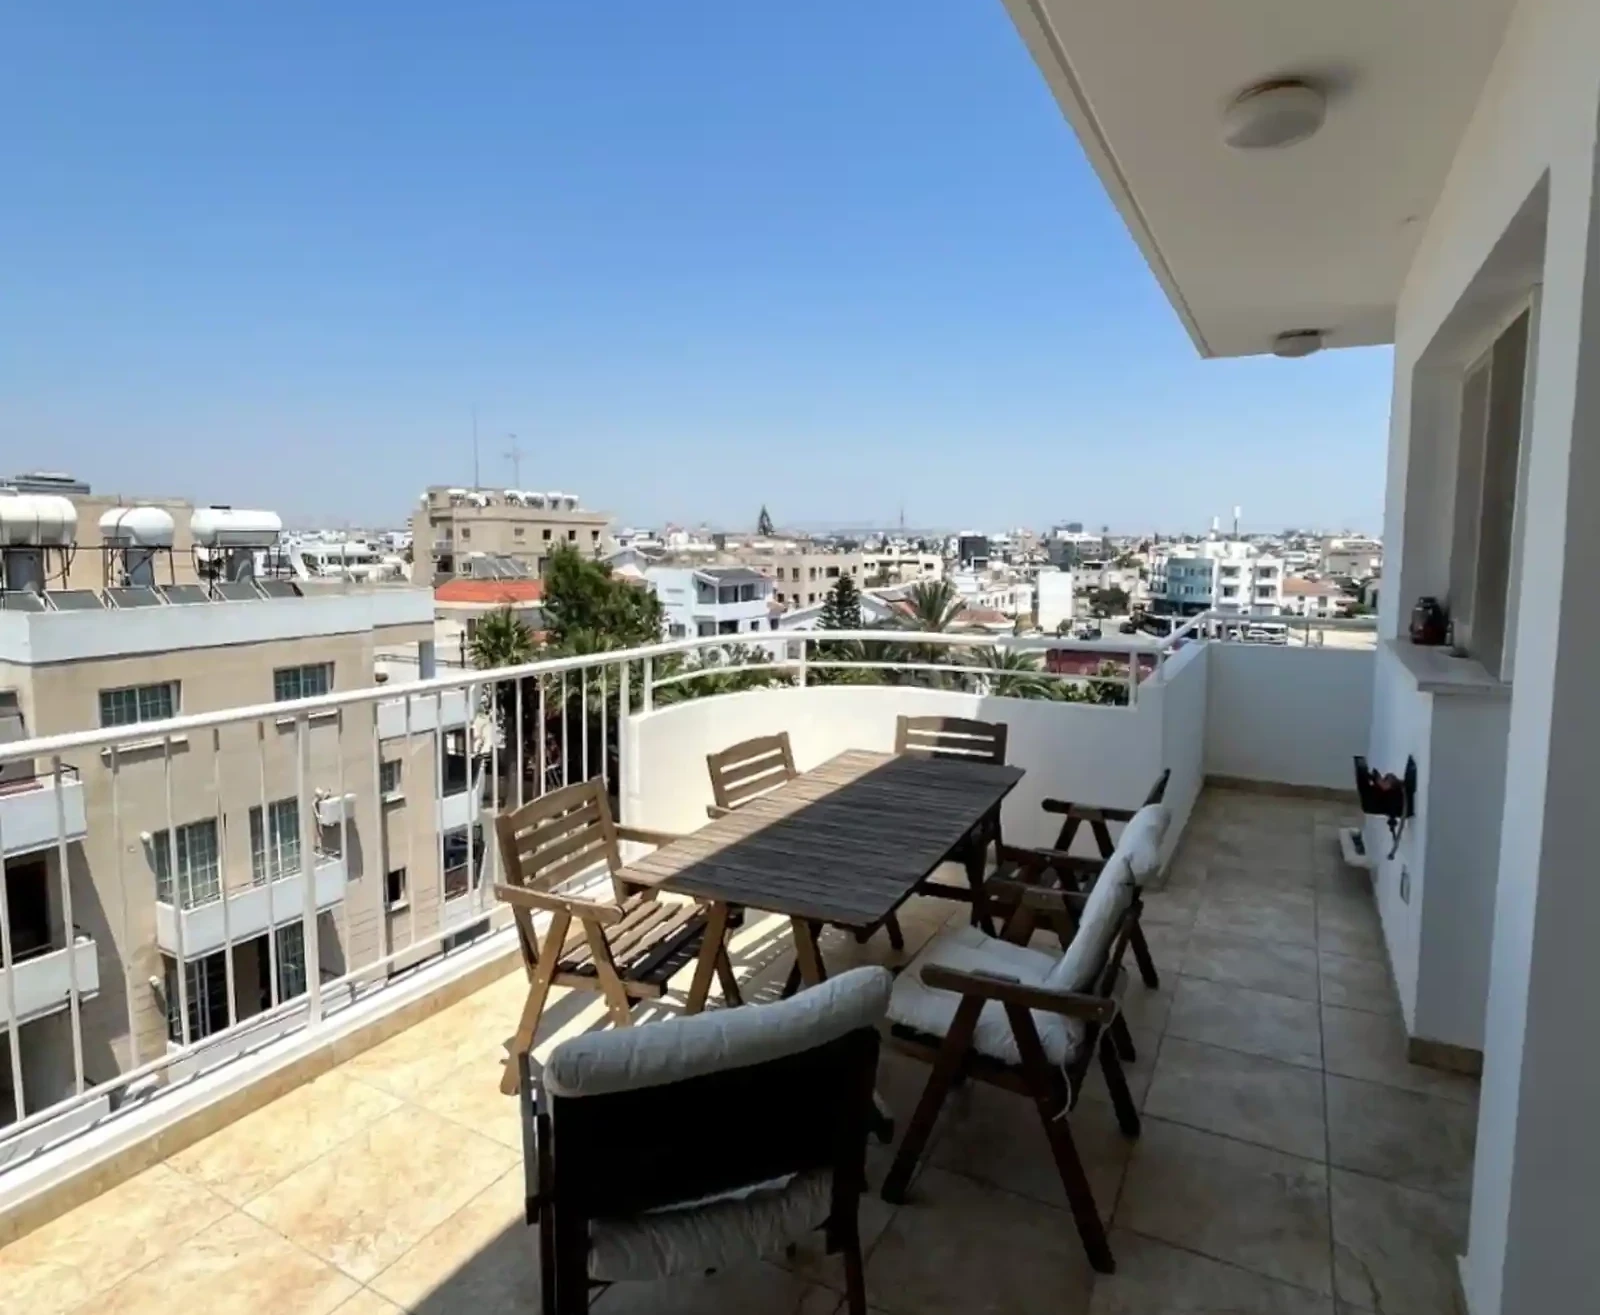 2-bedroom penthouse to rent €1.050, image 1